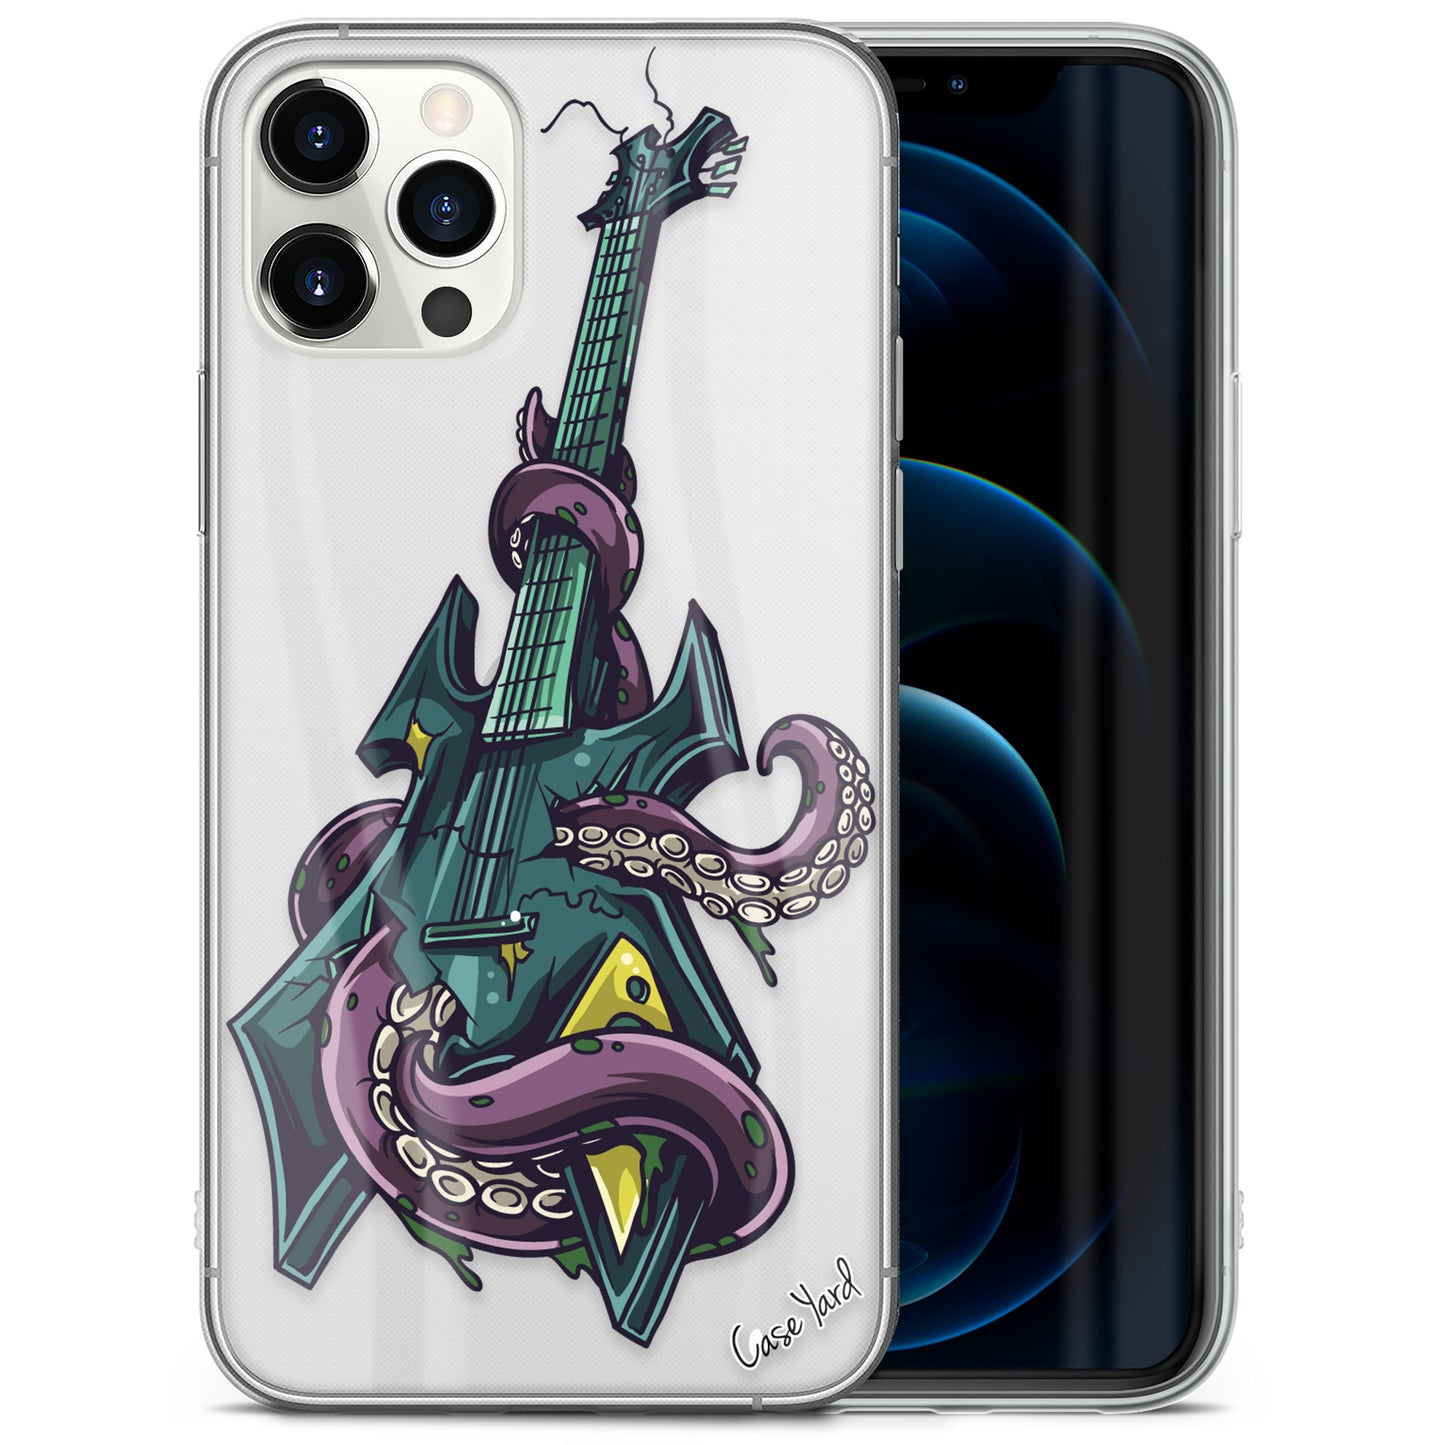 TPU Case Clear case with (Kraken Guitar) Design for iPhone & Samsung Phones